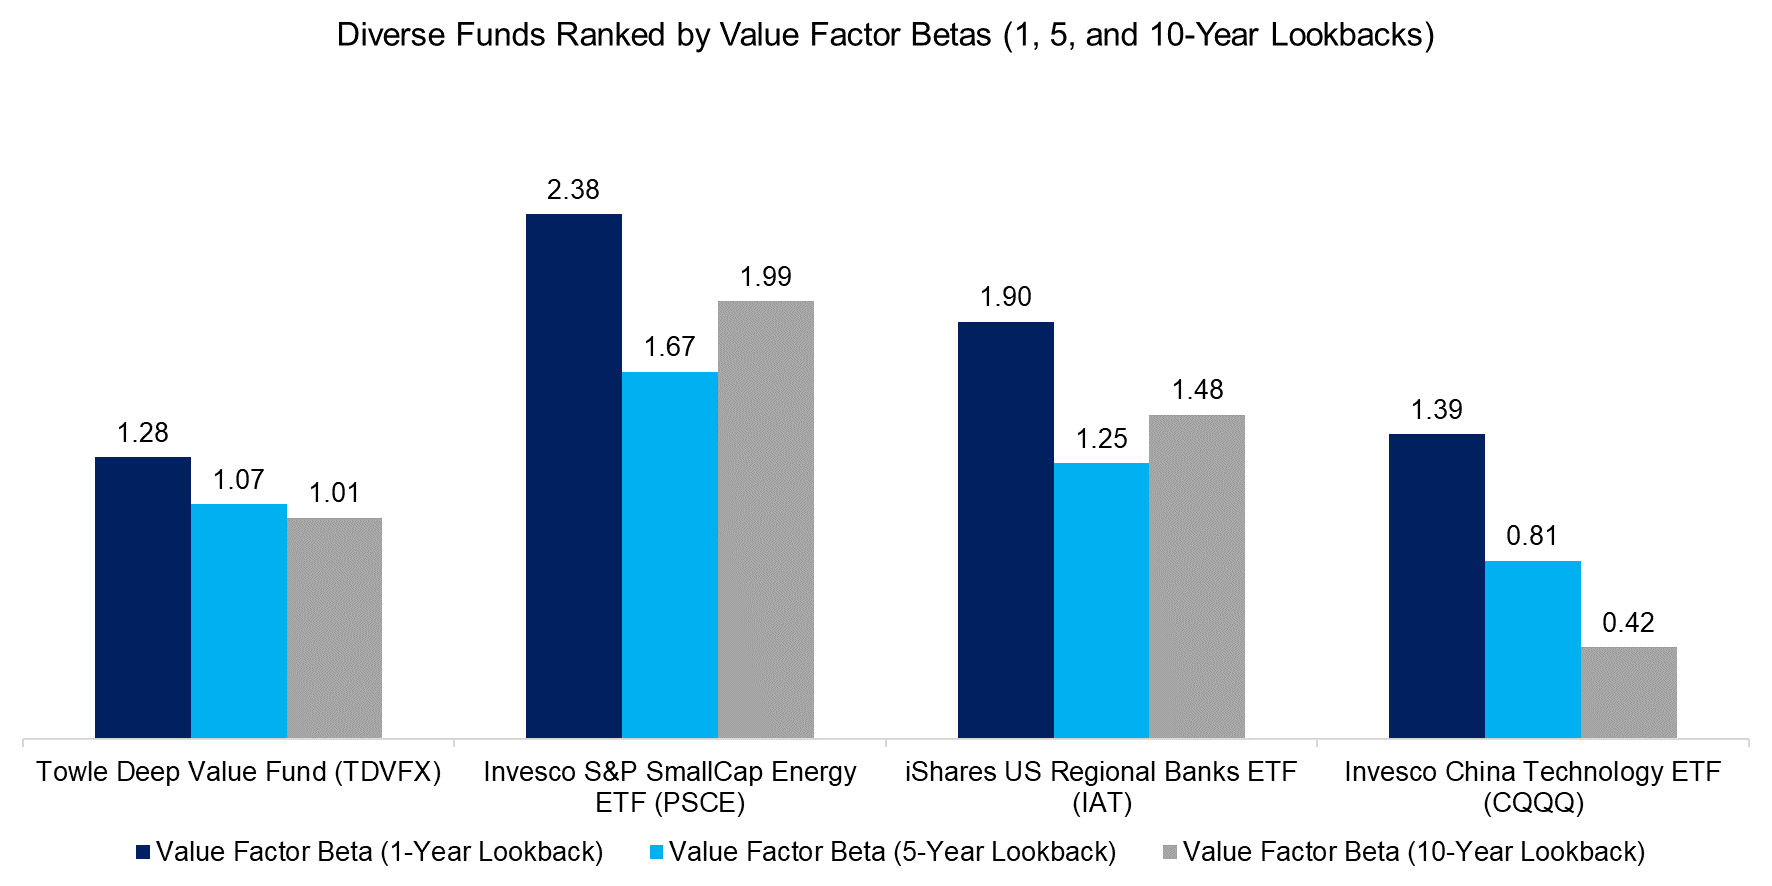 Diverse Funds Ranked by Value Factor Betas (1, 5, and 10-Year Lookbacks)